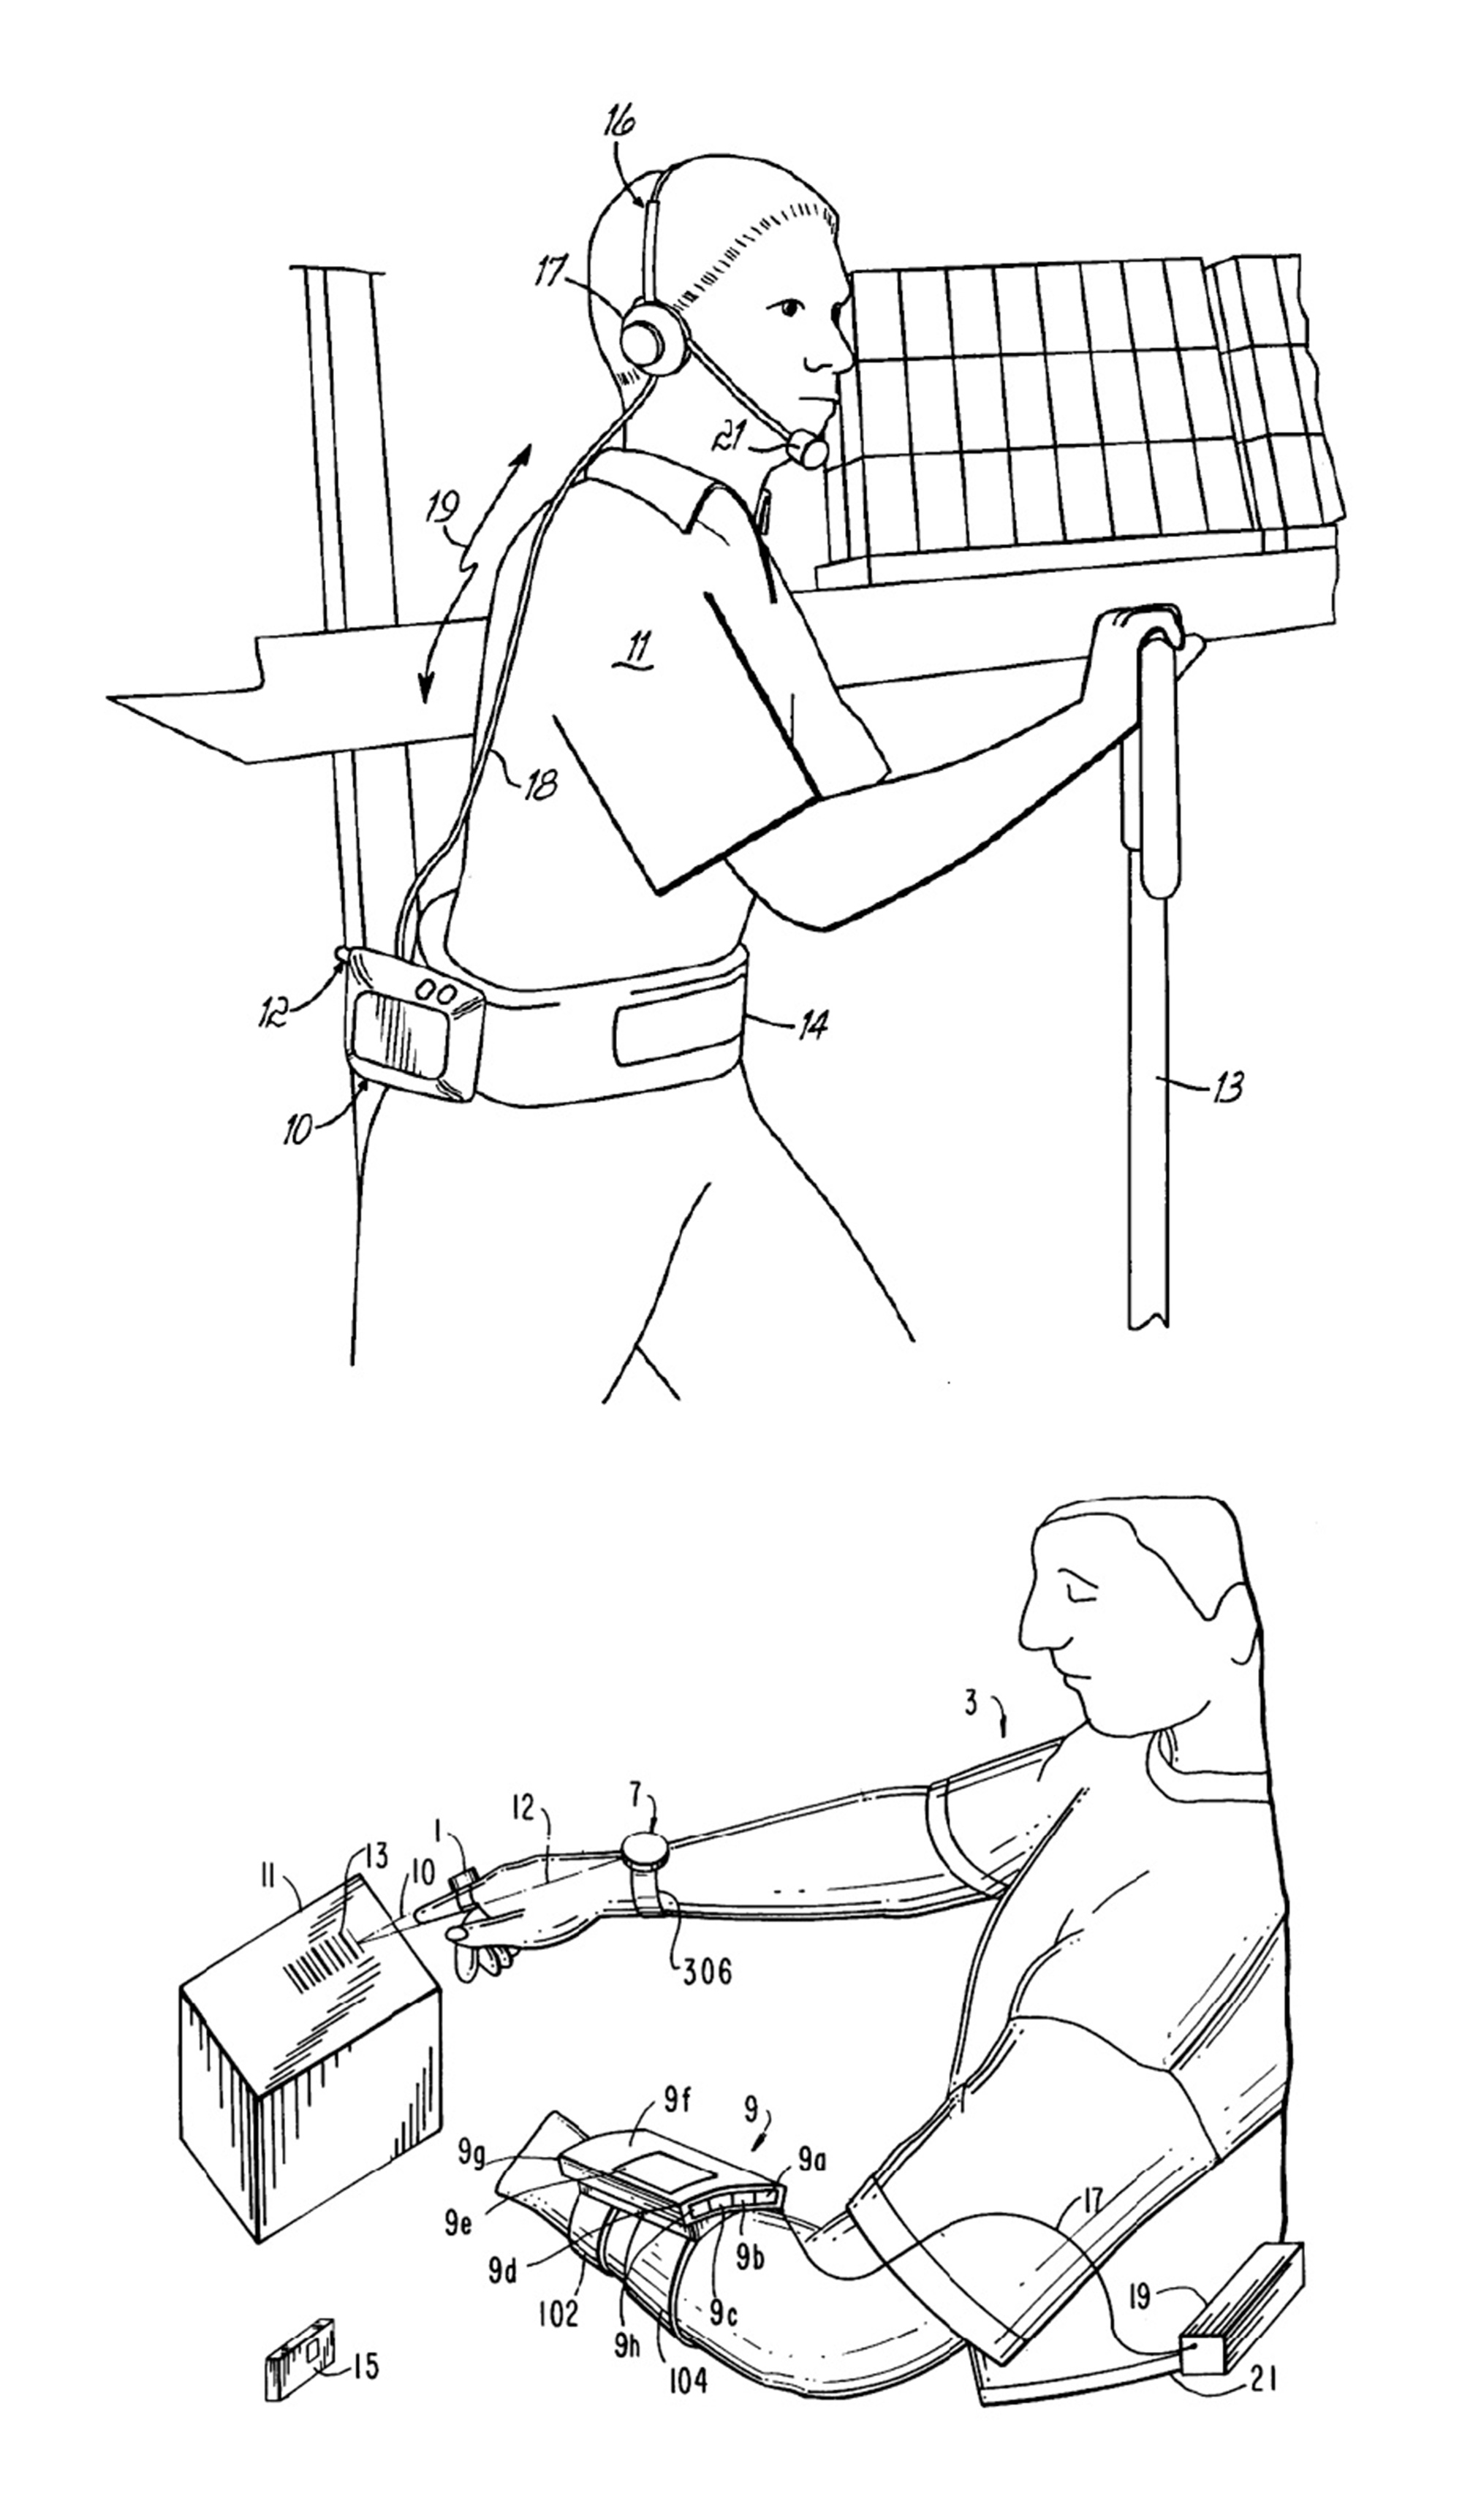 Top: Lucas Systems uses personal wearable computers for their JenniferTM VoicePlus voice-directed picking system. Illustration for US patent publication no. 2007/0080930 A1, 12 April 2007. Bottom: Scanners can also be worn on the body. This drawing for Motorola’s US patent no. 5898161 (27 April 1999) highlights features of this system, including the ring used to scan bar codes and the readout attached to the forearm.